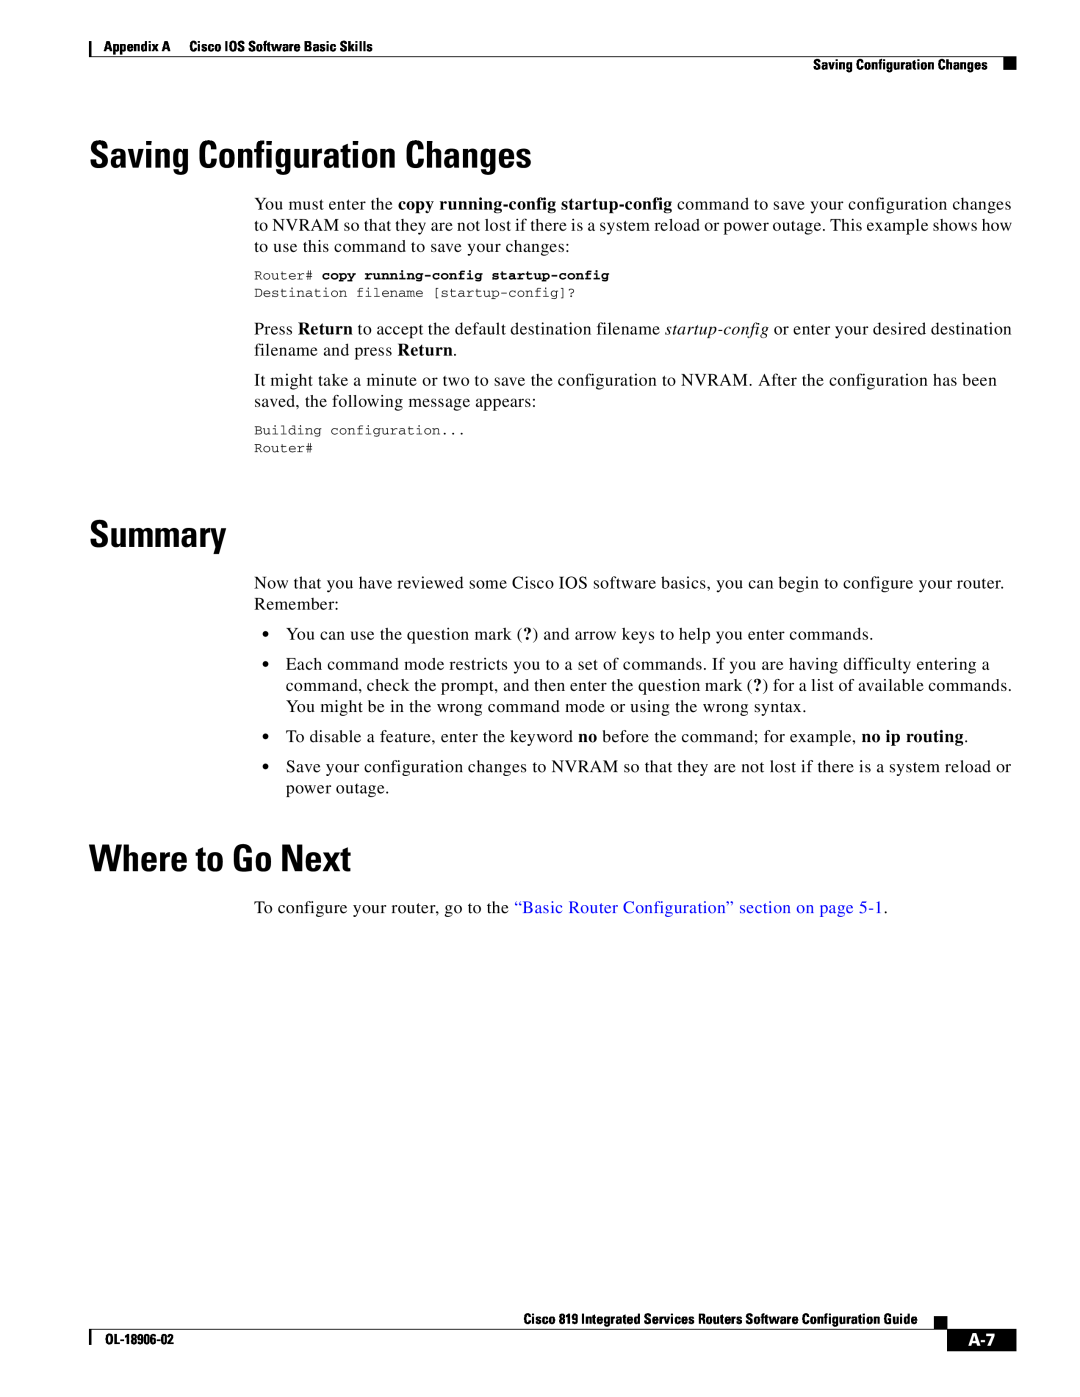 Cisco Systems C819HG4GVK9, C819GUK9 manual Saving Configuration Changes, Summary, Where to Go Next 